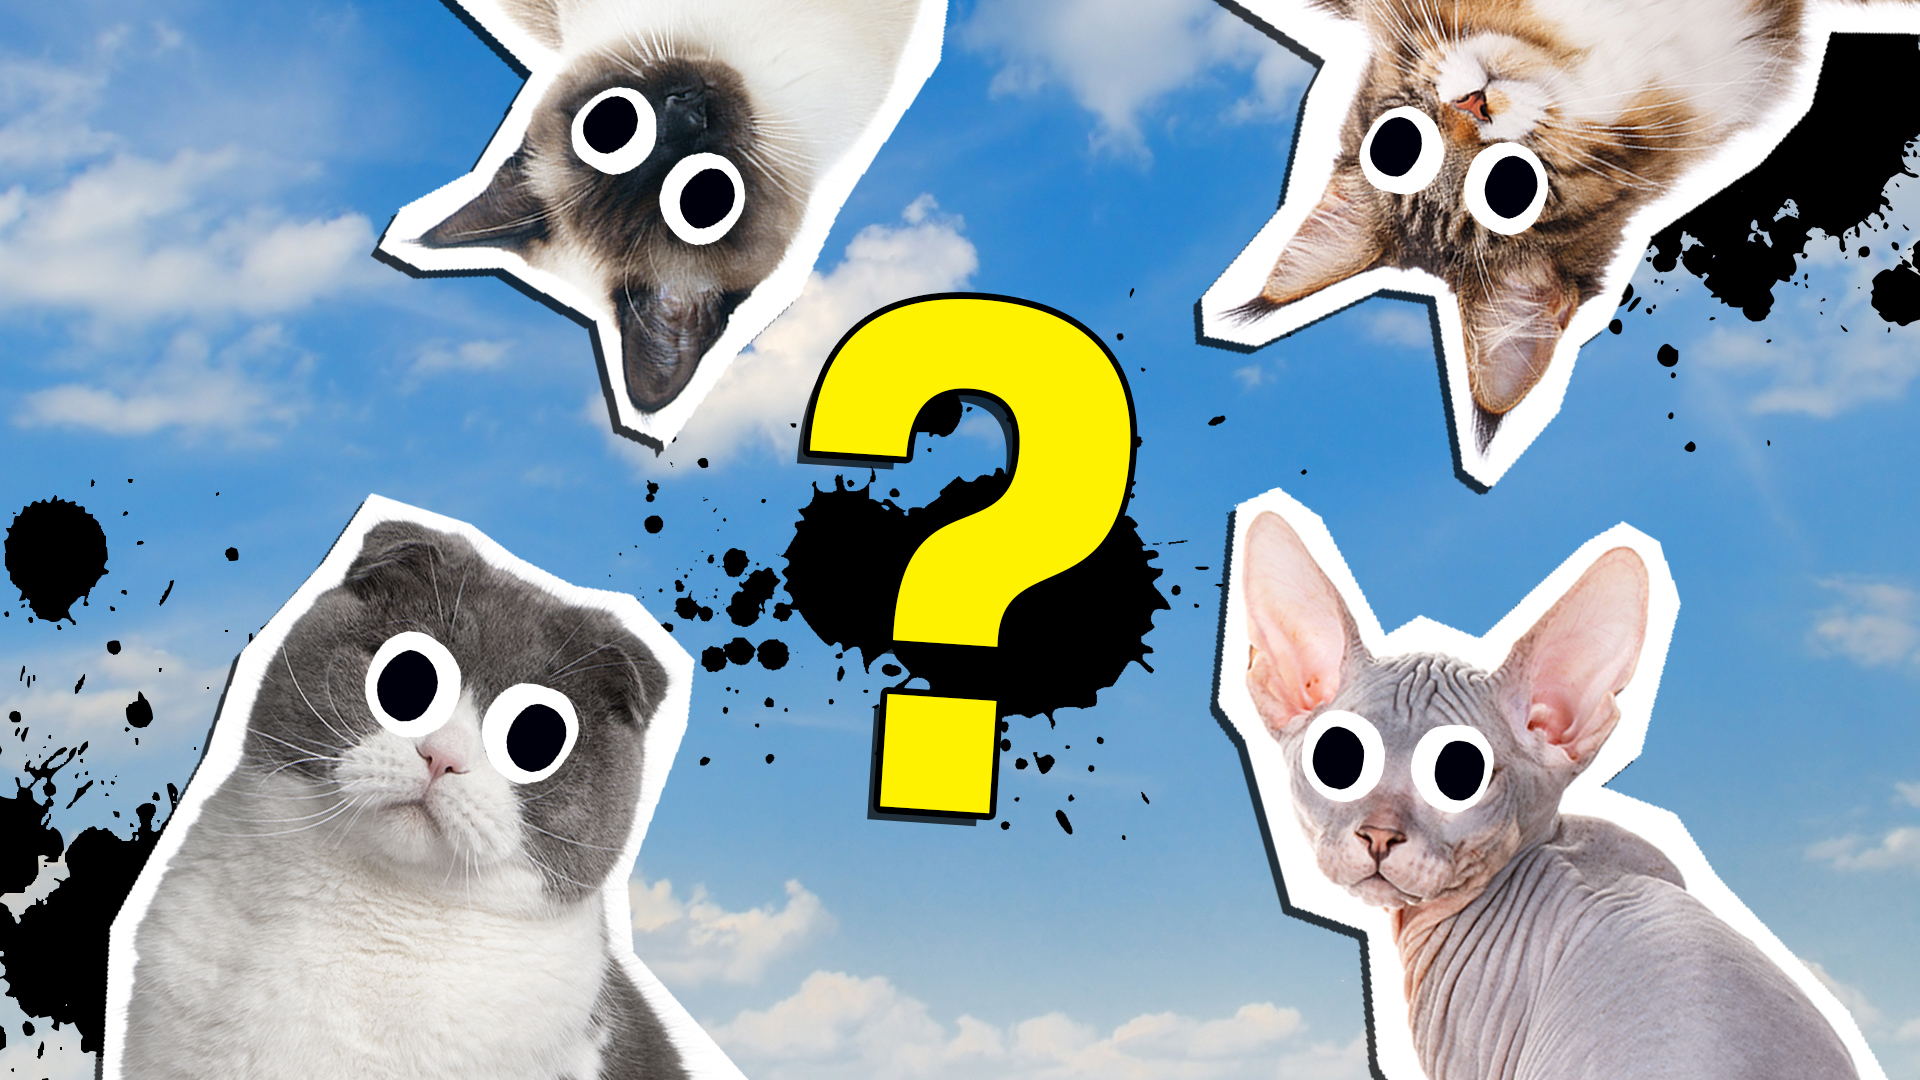 Cats Empire Quiz: What Type of Cat are You? – SKGaleana